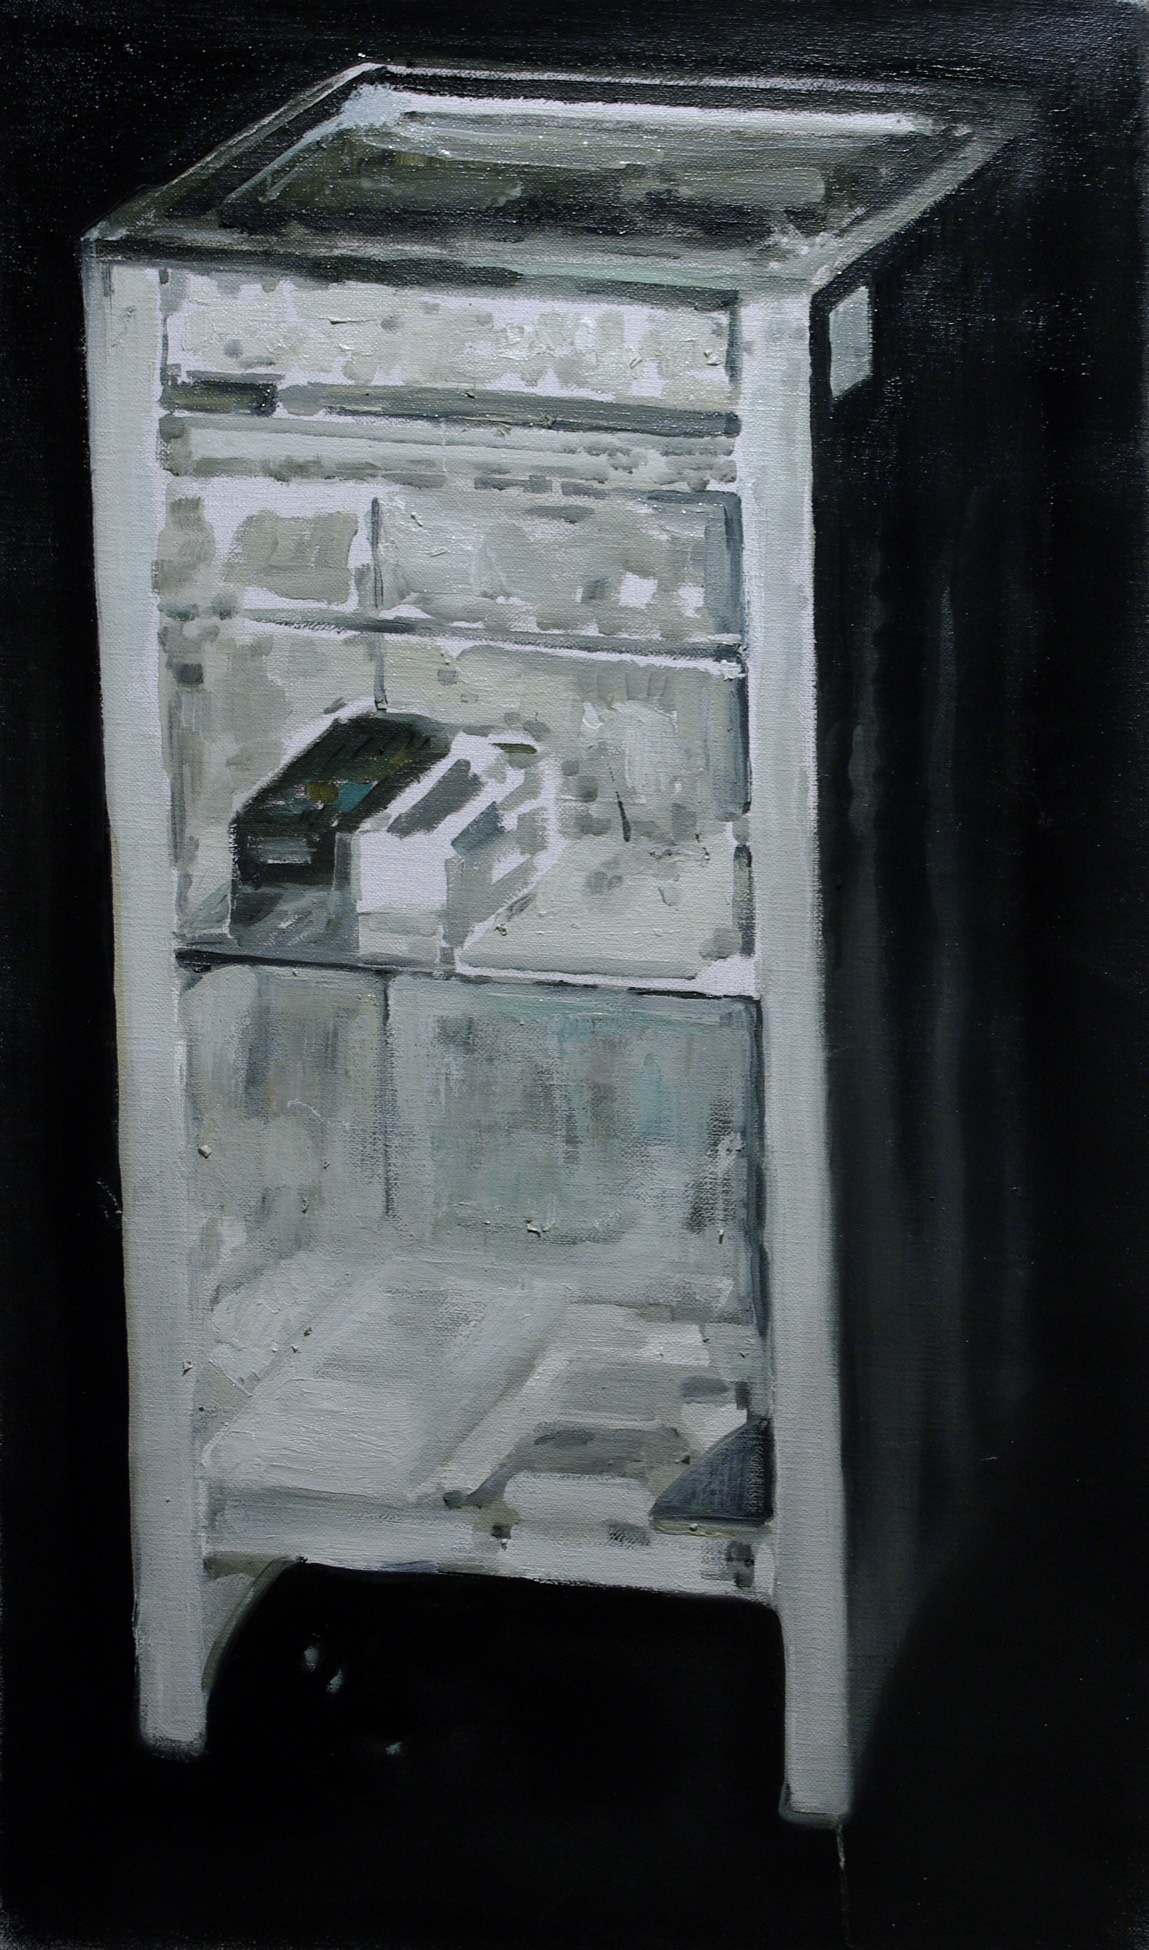 The ideal Bedside, 2010